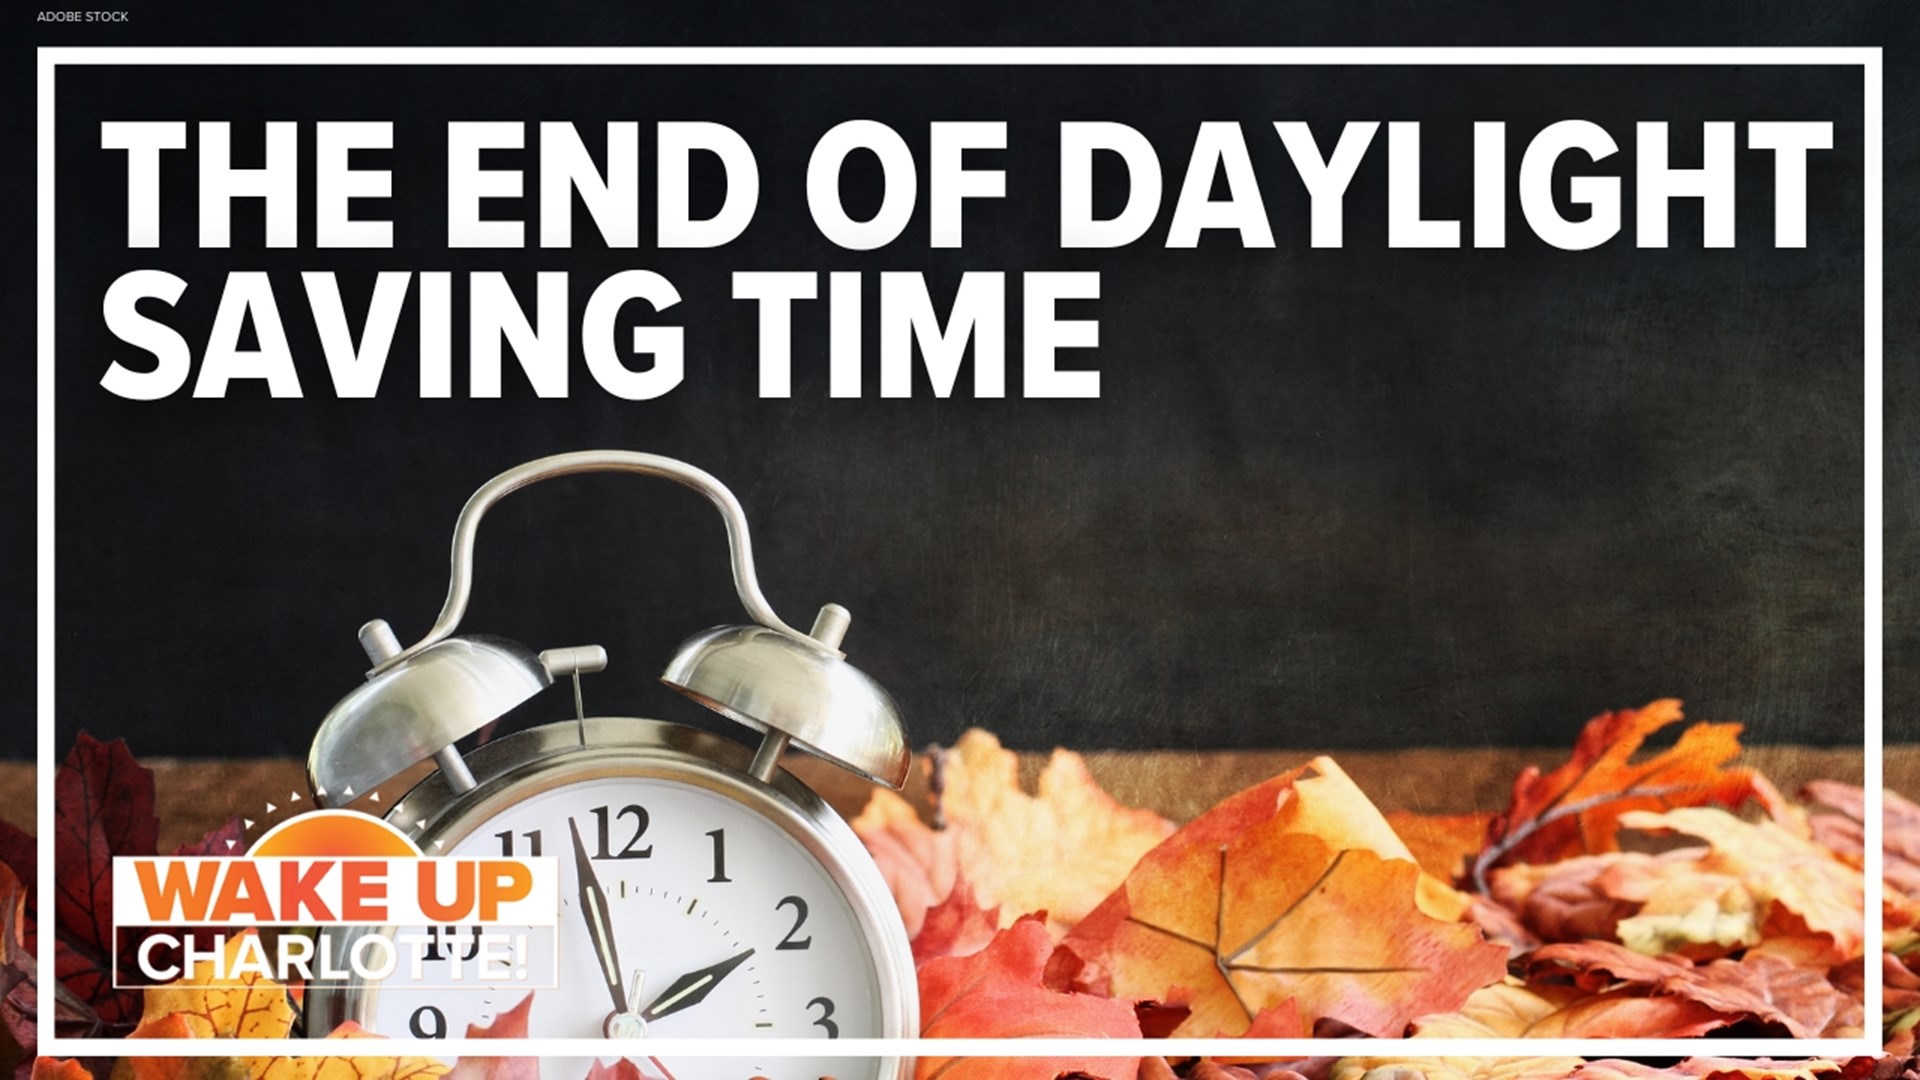 The health benefits of permanent Daylight Saving Time